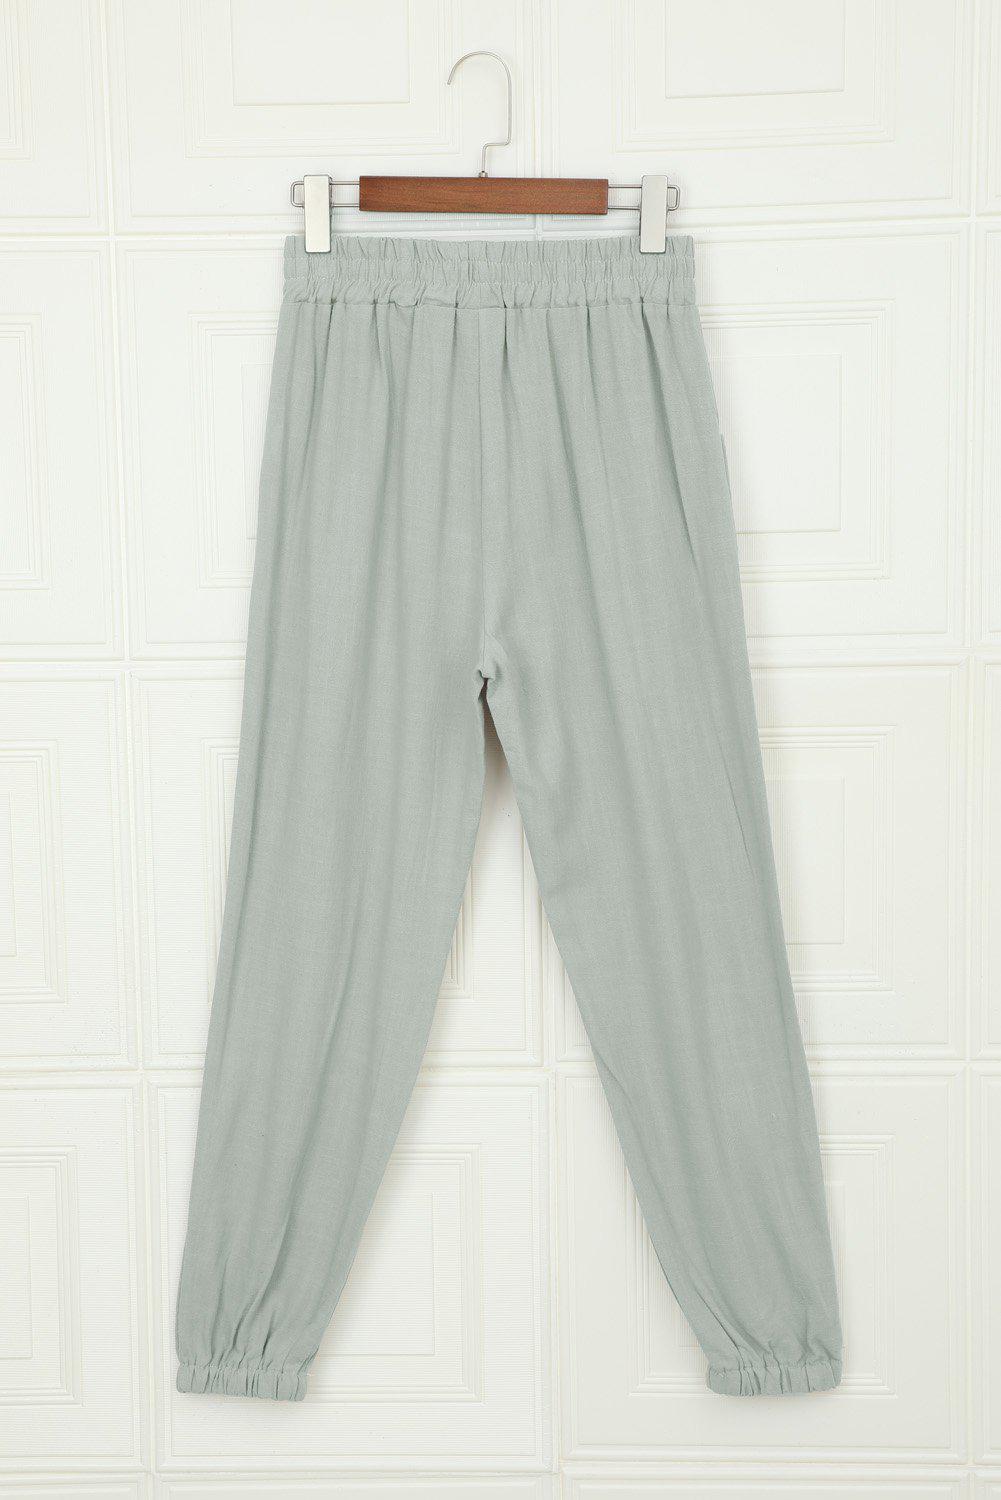 Linen Pocketed Elastic Waistband Joggers-BOTTOMS SML-[Adult]-[Female]-Gray-S-Blue Zone Planet